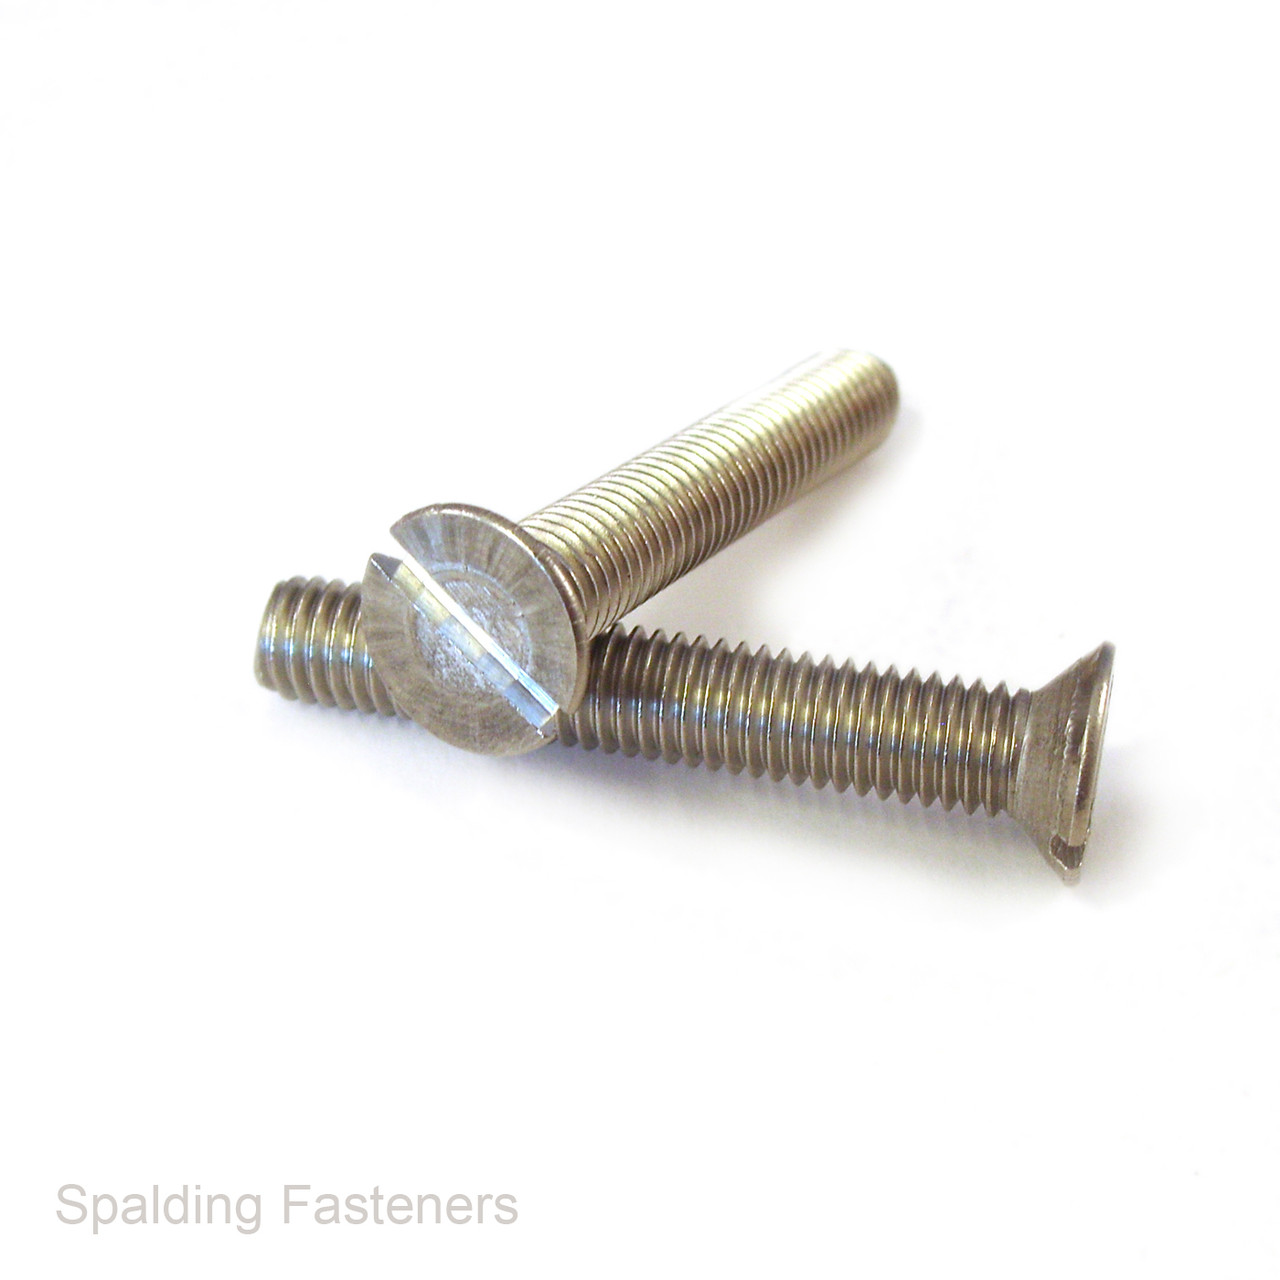 4-40 UNC A2 Stainless Steel Countersunk Slotted Head Machine Screws